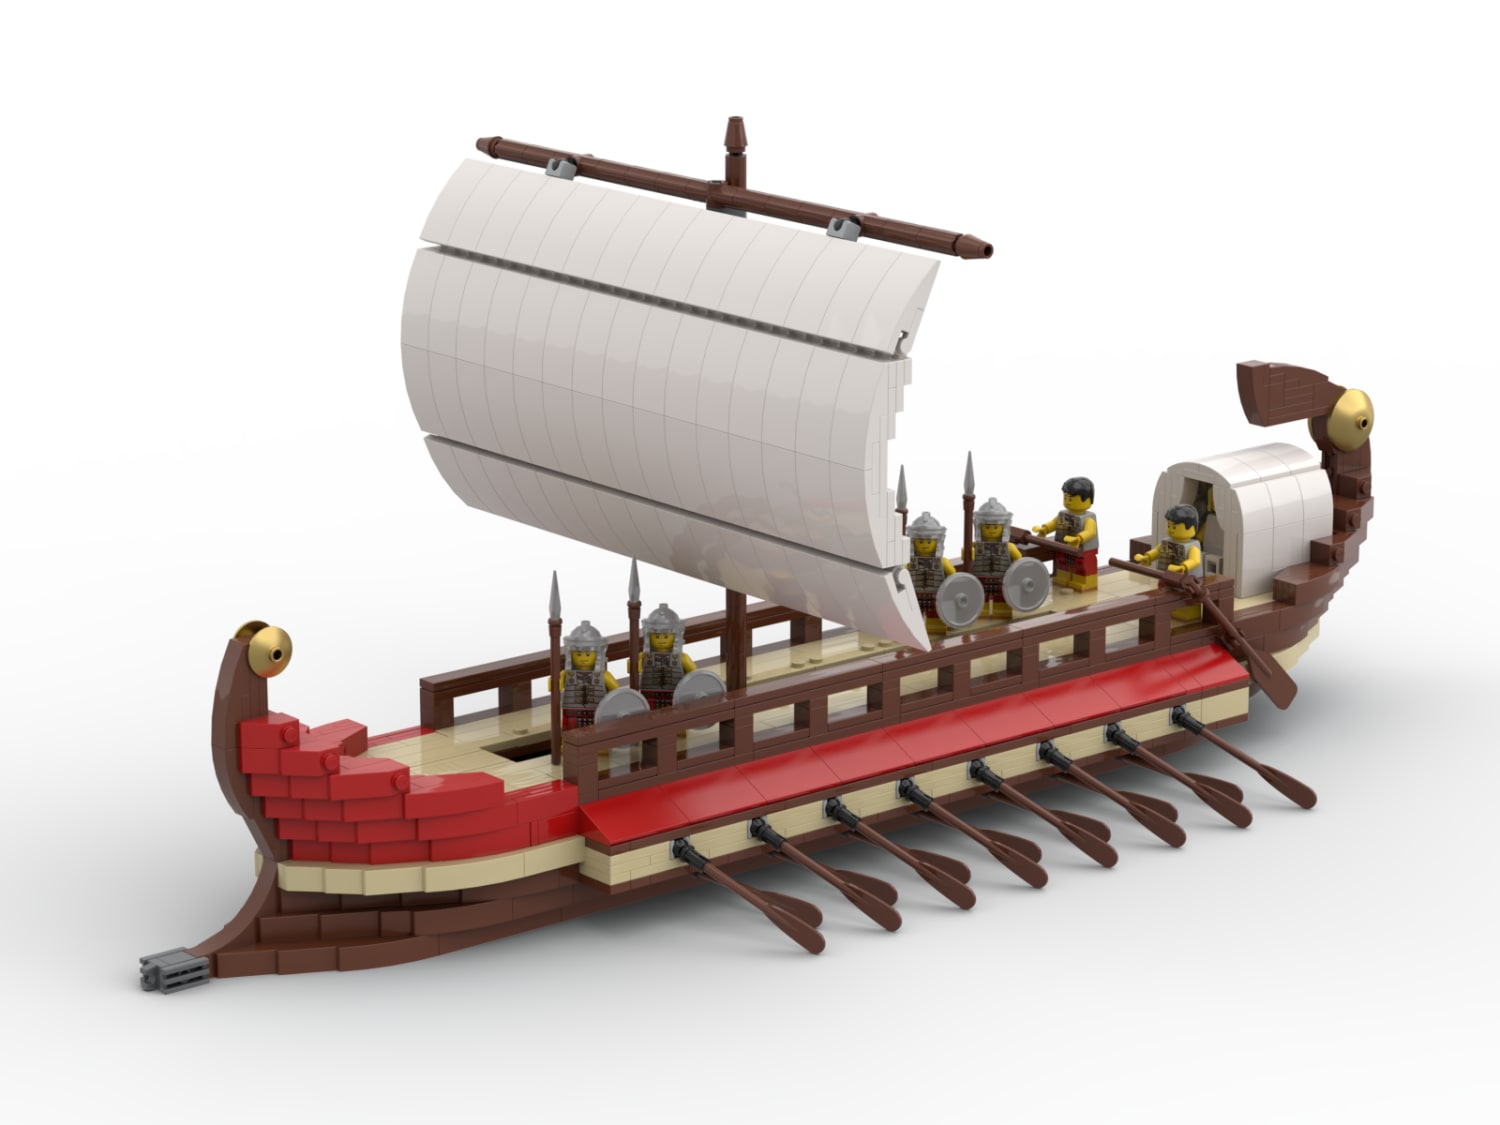 I made a Bireme (two rows of rowers) inspired by ancient Roman/Greek galleys. What do you think? I appreciate any feedback :) Picture of the rowers in link in comment!